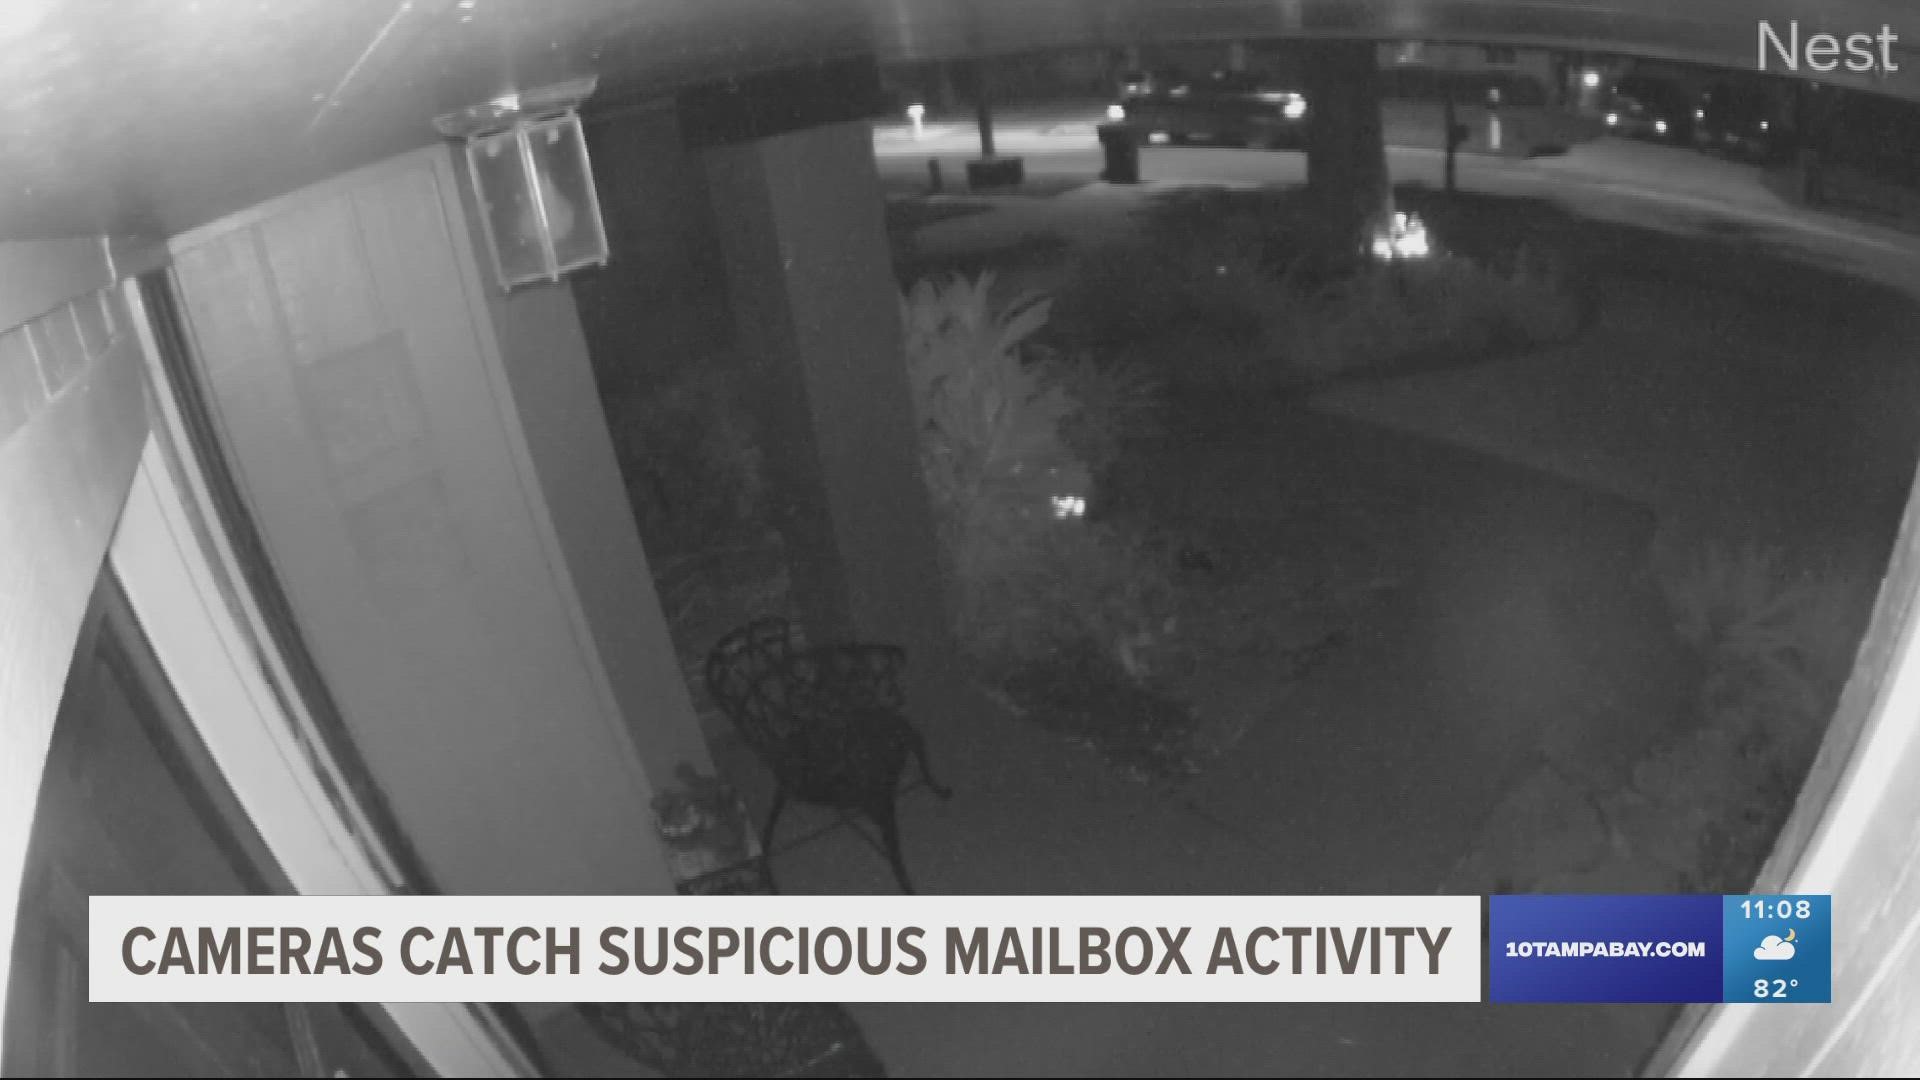 The USPS Postal Inspector serving Tampa says the number one way to deter mail thefts is to routinely empty your mailbox.